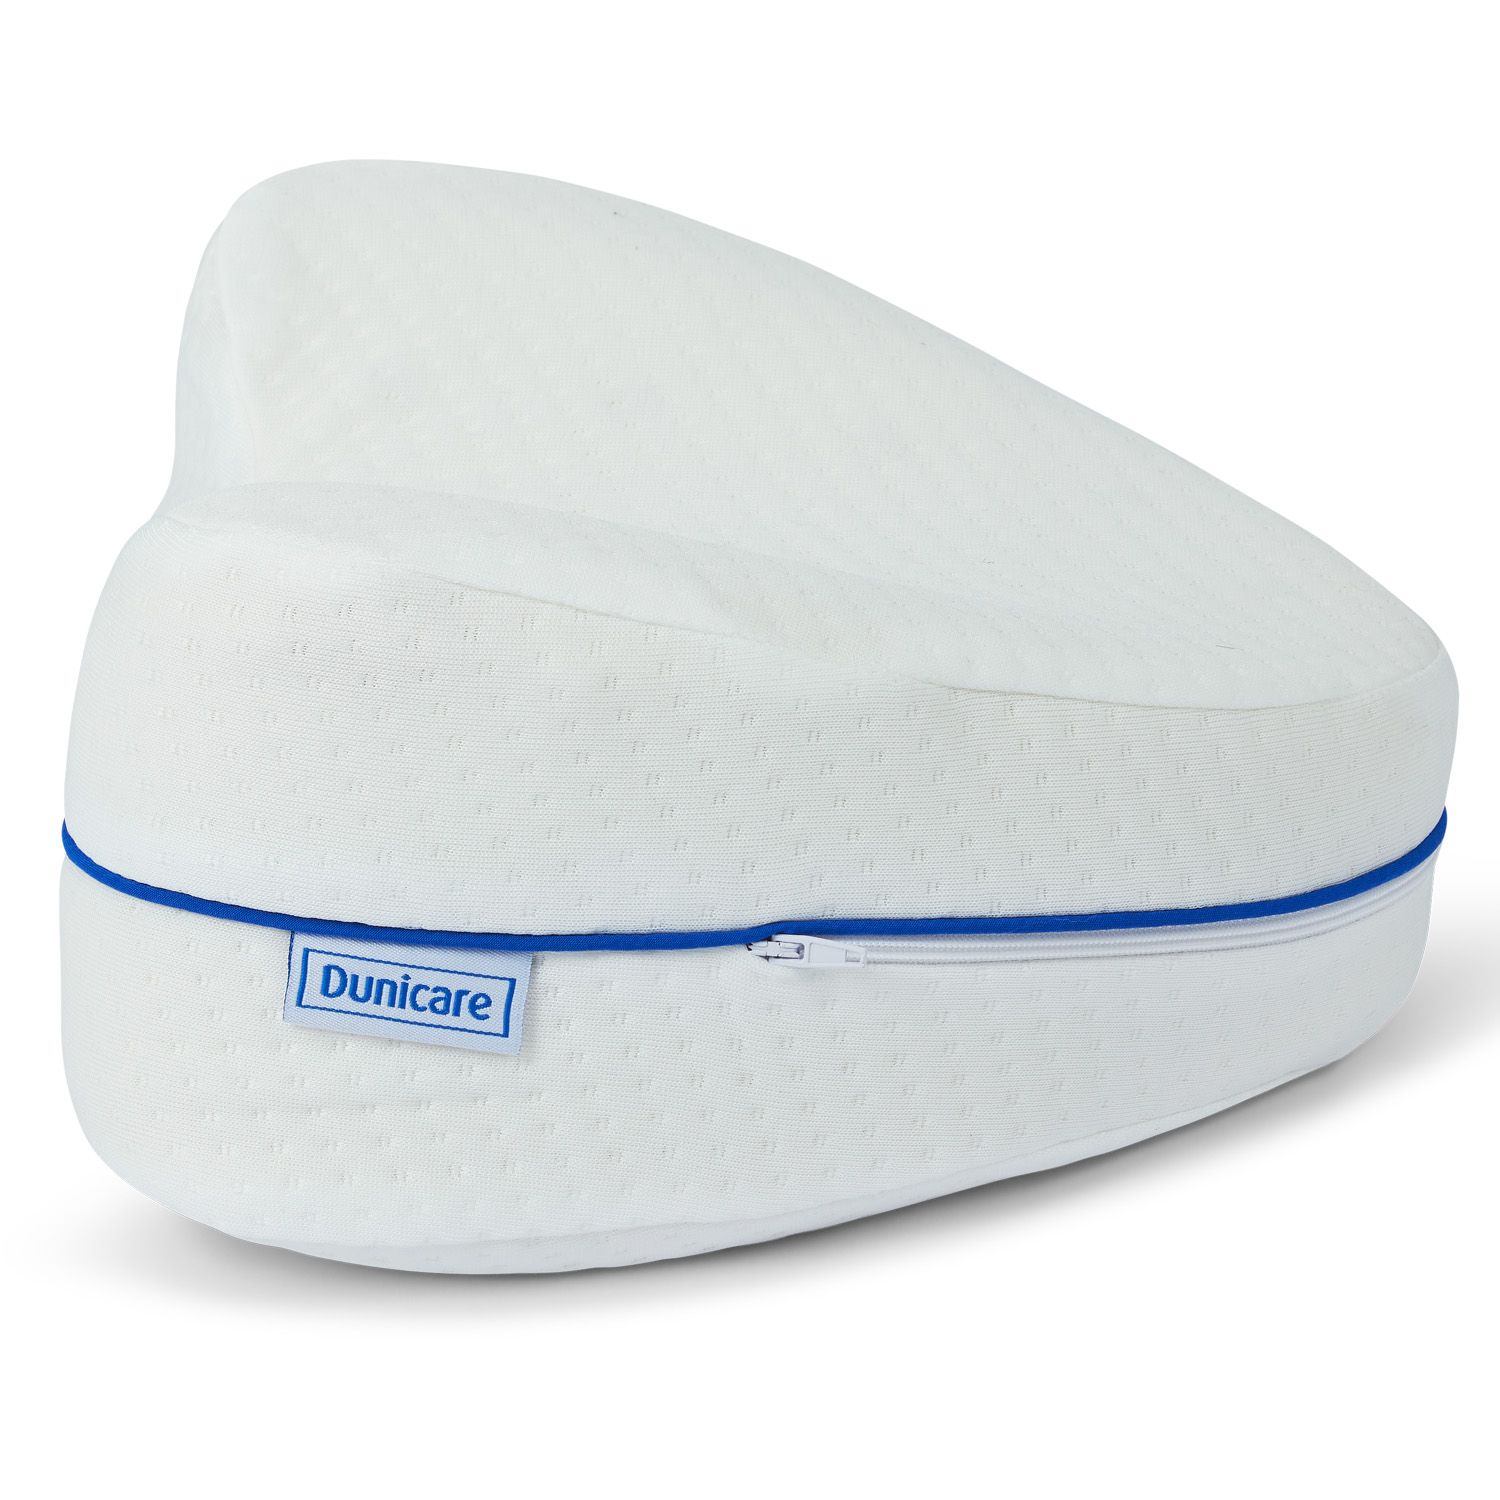 dunimed dunicare leg pillow pictured from the side